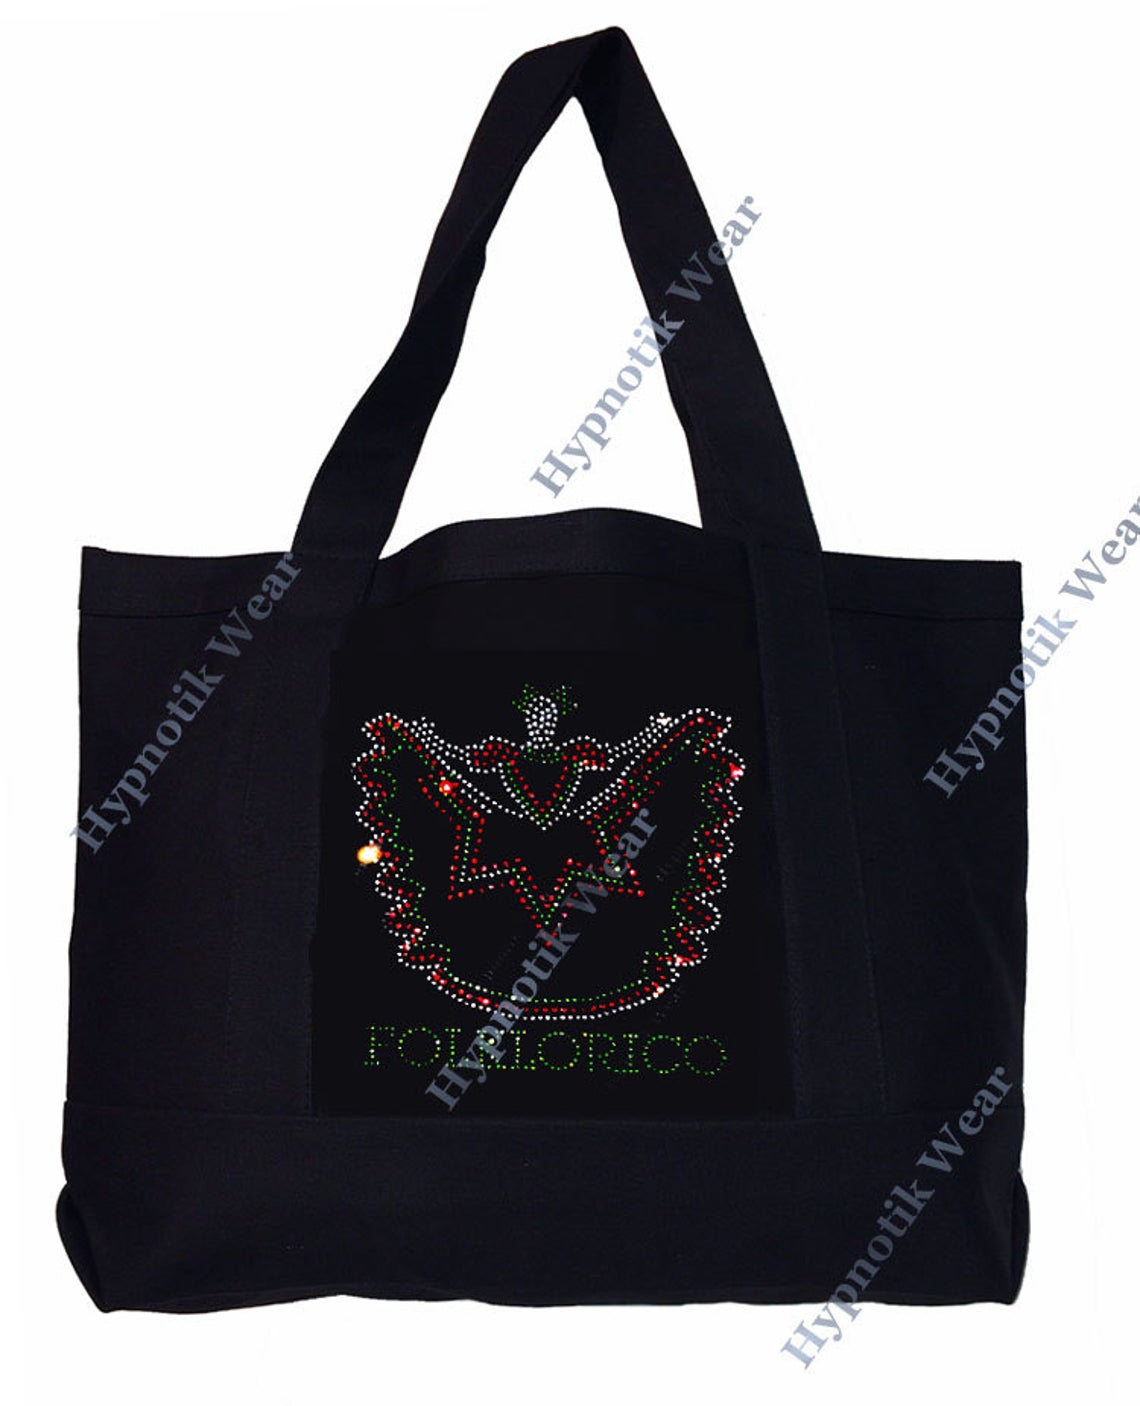 Rhinestone Sturdy Tote Bag with Zipper & Front Pocket " Folklorico Dancer " Iron On , Hot fix, Dance, Culture